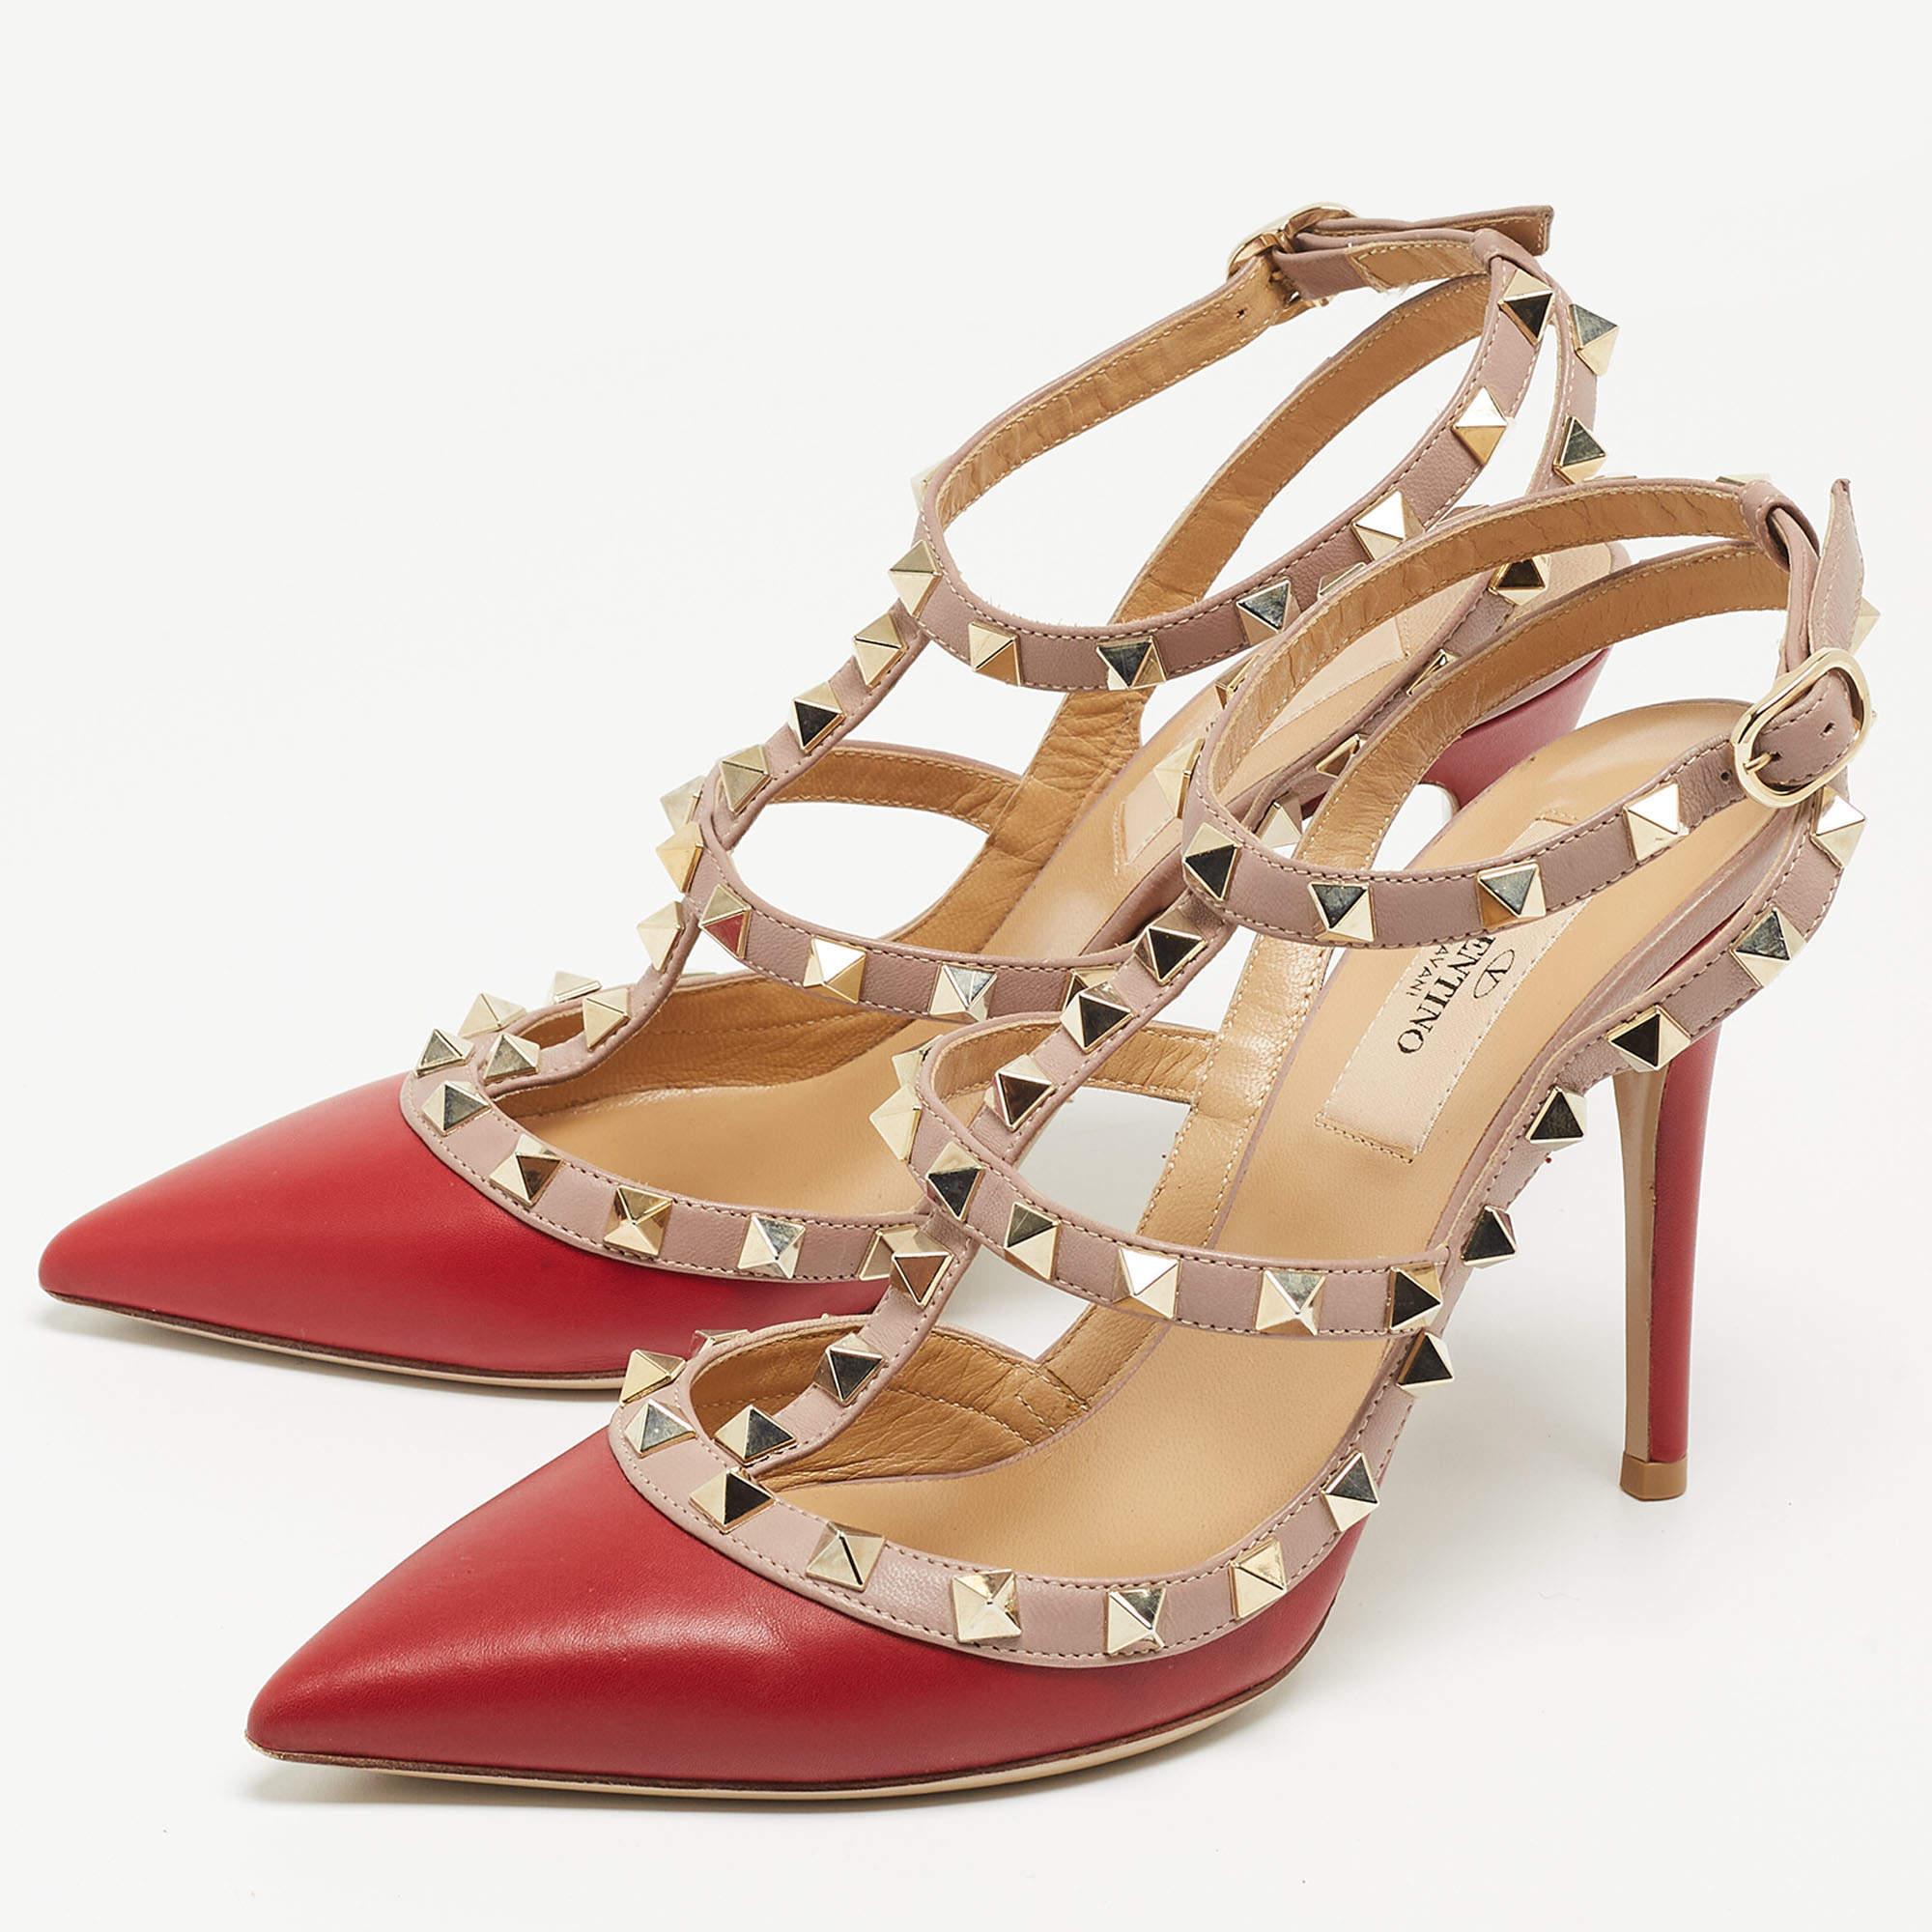 Make a statement with these Valentino red pumps for women. Impeccably crafted, these chic heels offer both fashion and comfort, elevating your look with each graceful step.

